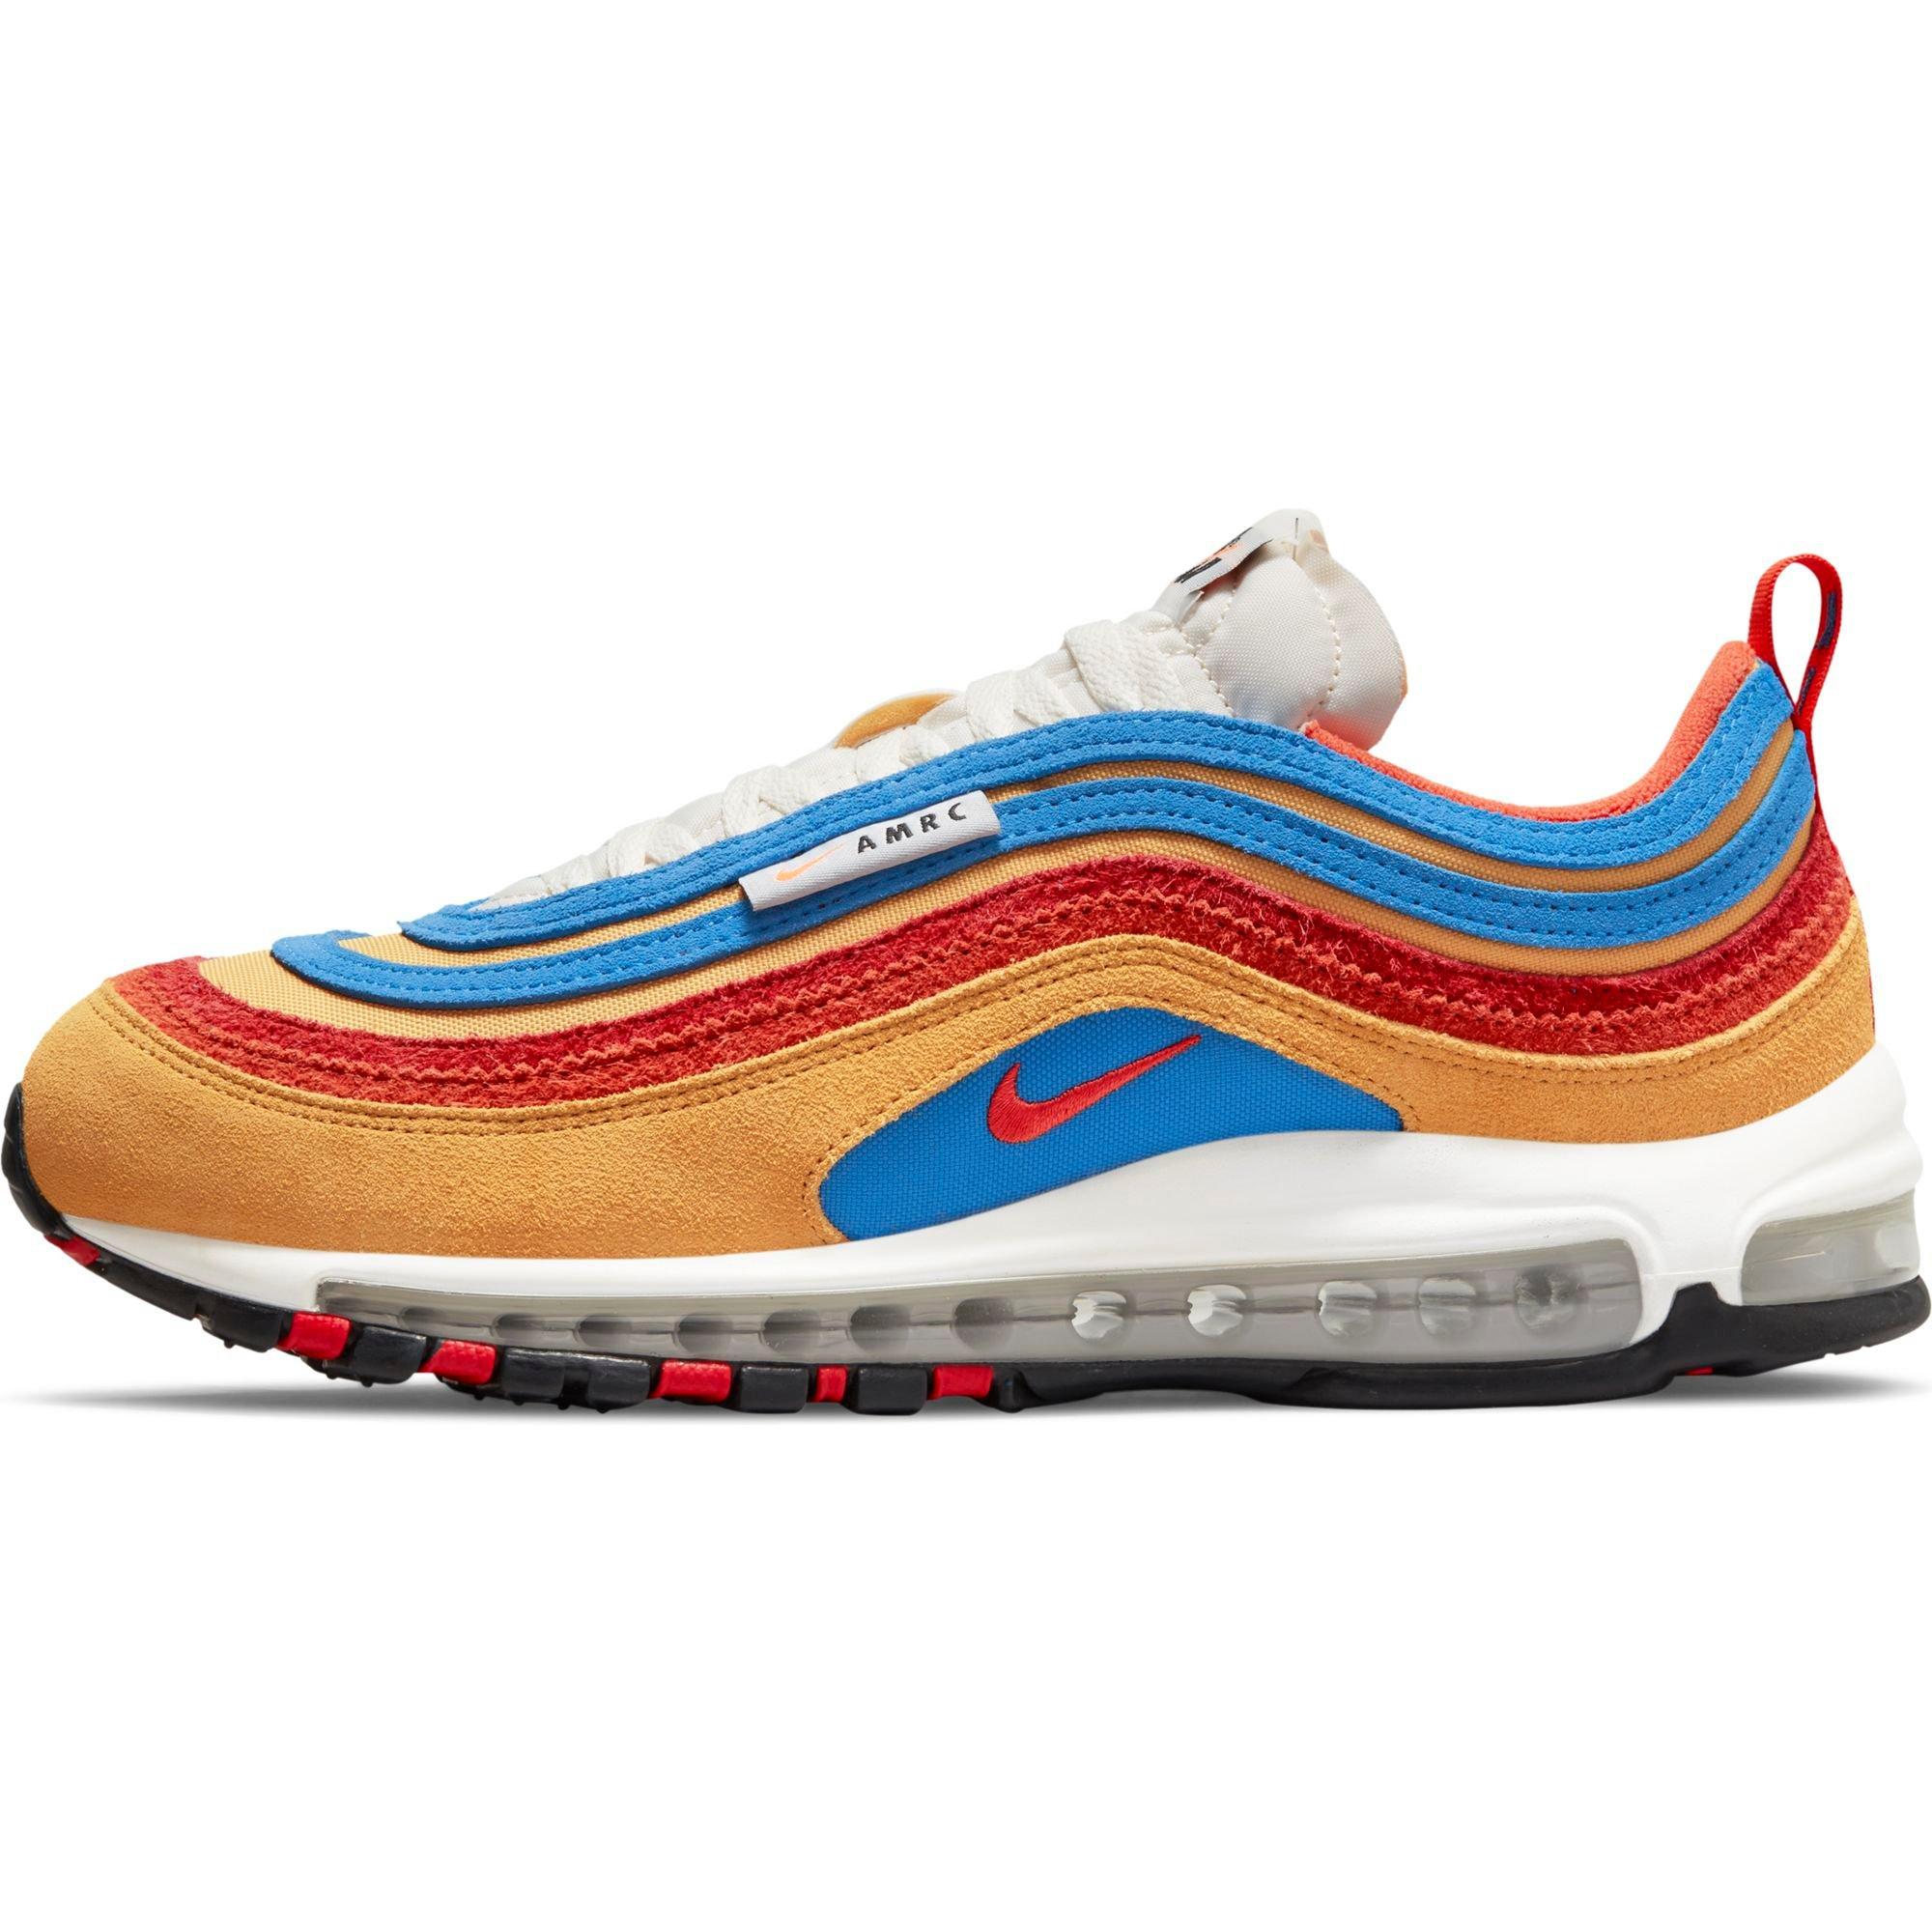 red yellow blue air max